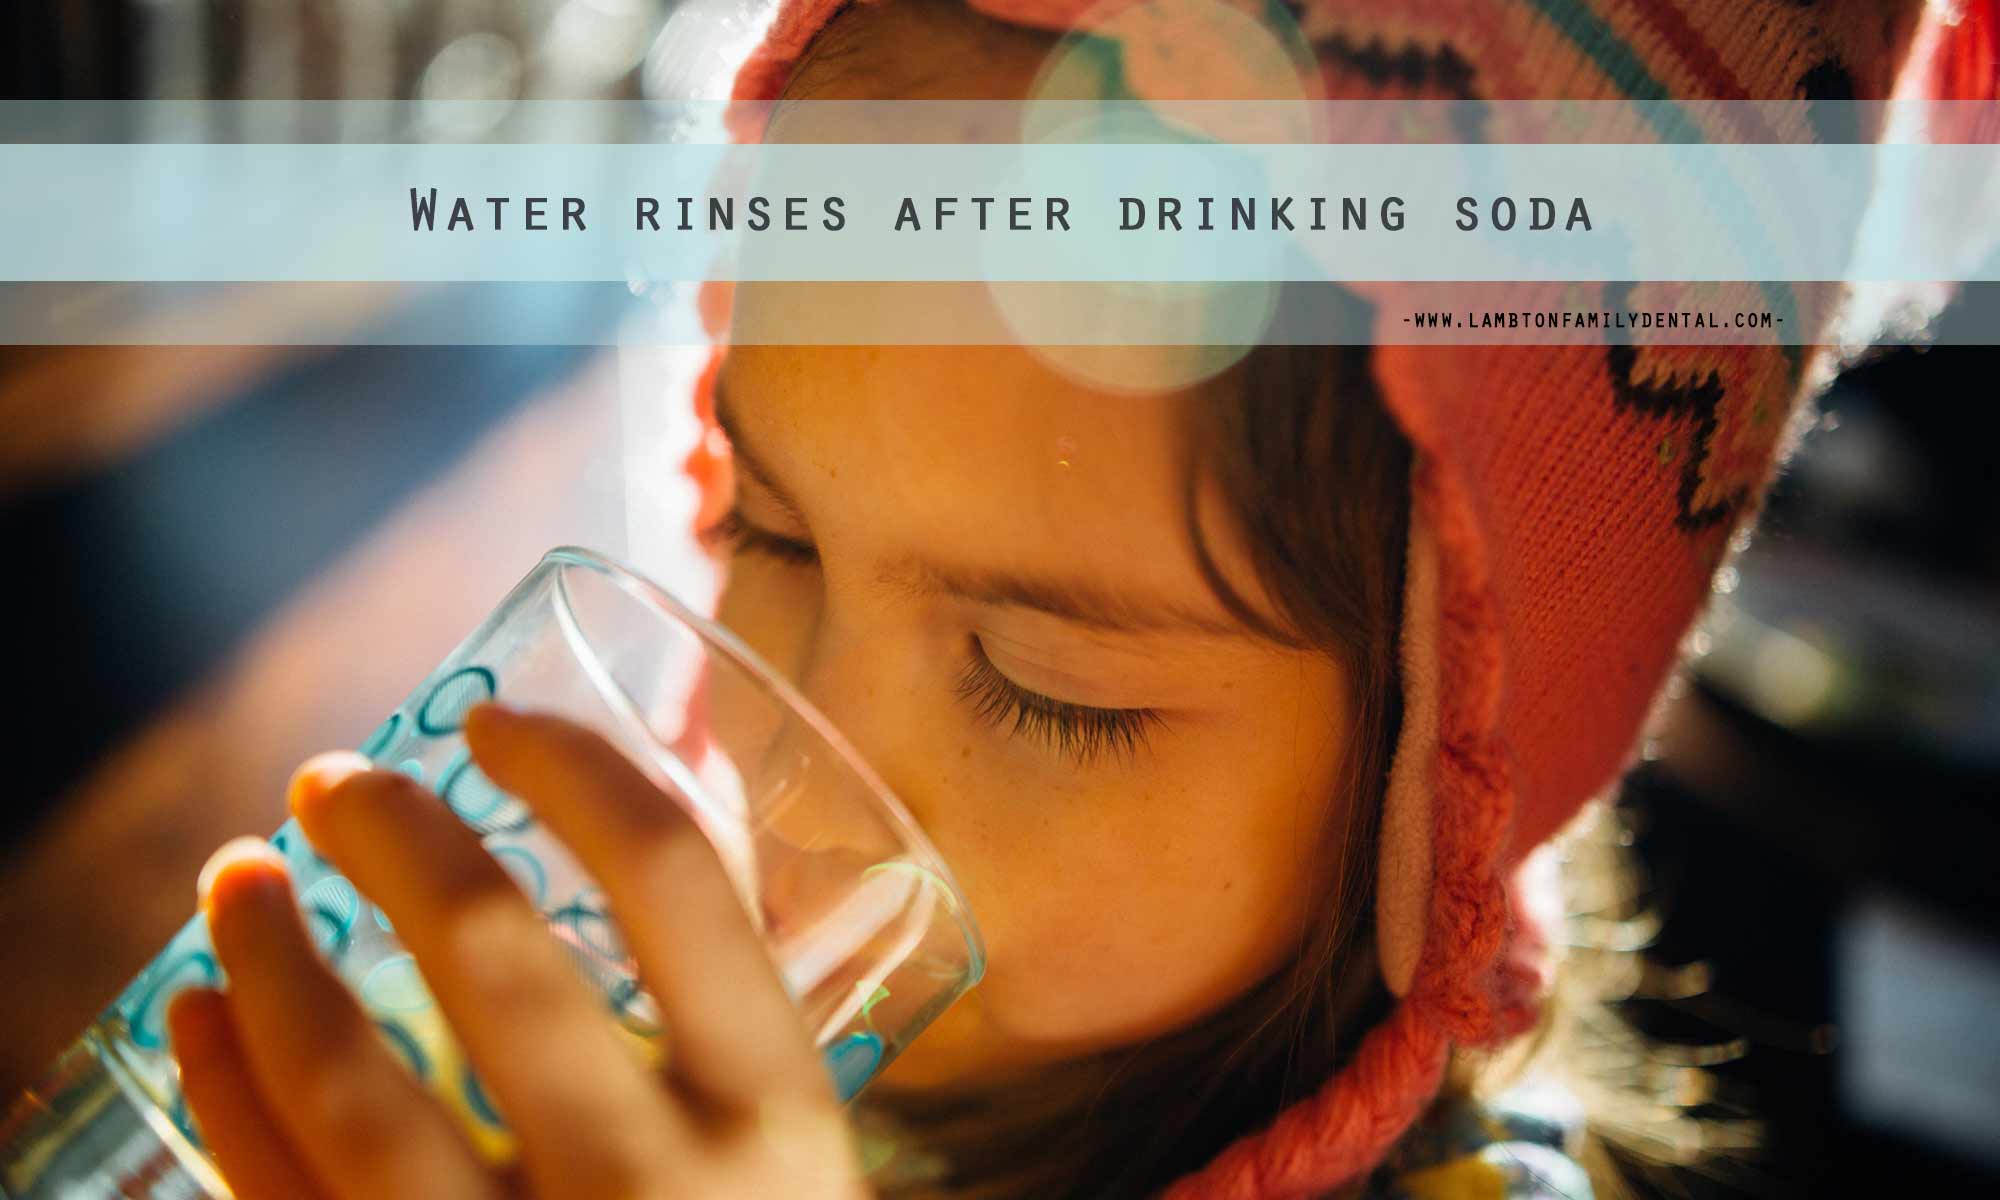 Water rinses after drinking soda